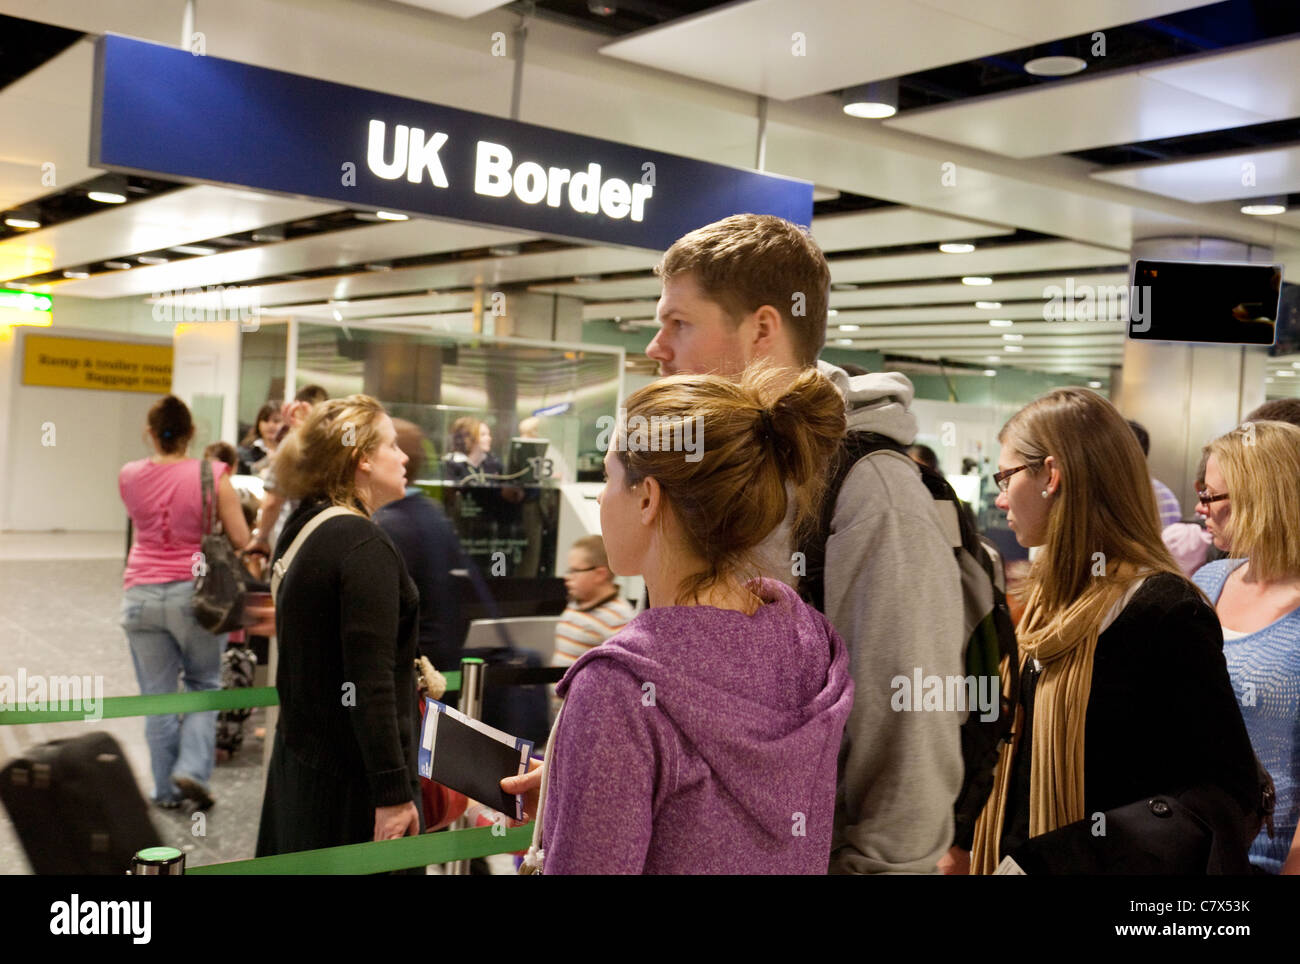 Young people waiting in a queue to enter the UK Border at immigration passport control, Terminal 3, Heathrow airport, London England Stock Photo